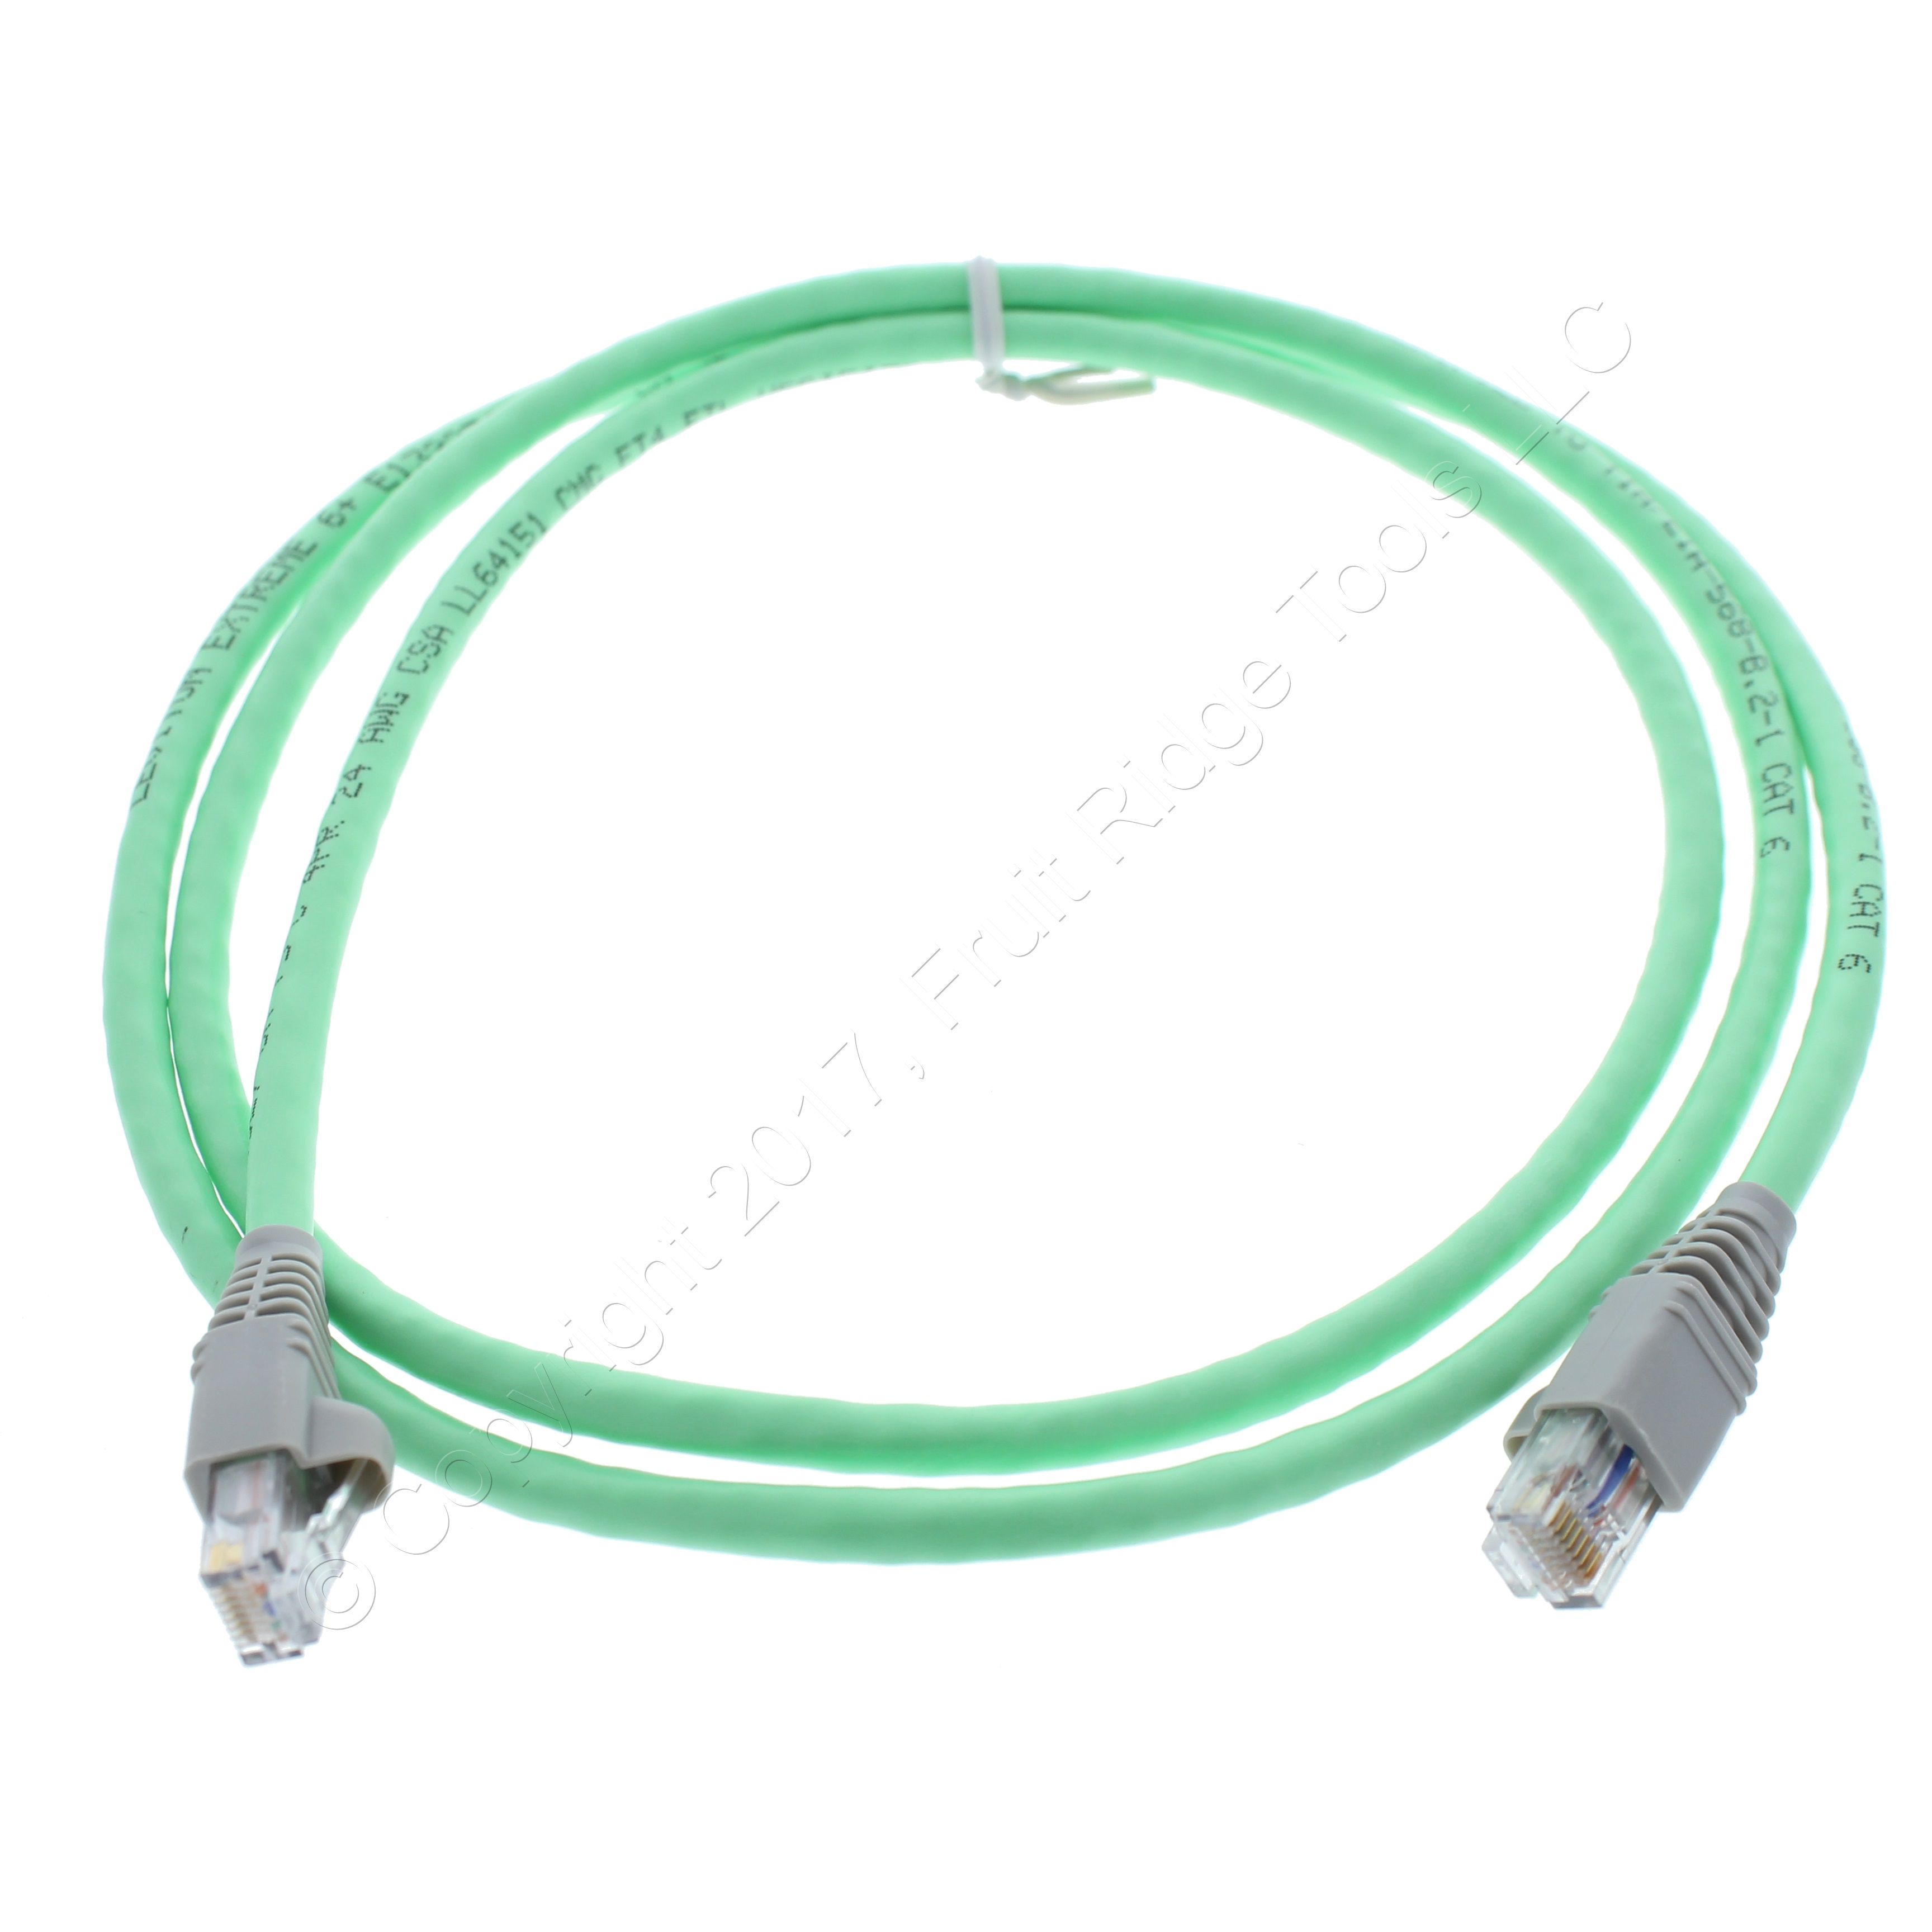 New Leviton Light Green 5&#039; Cat 6+ Extreme Ethernet LAN Patch Cord Cable 62460-5G